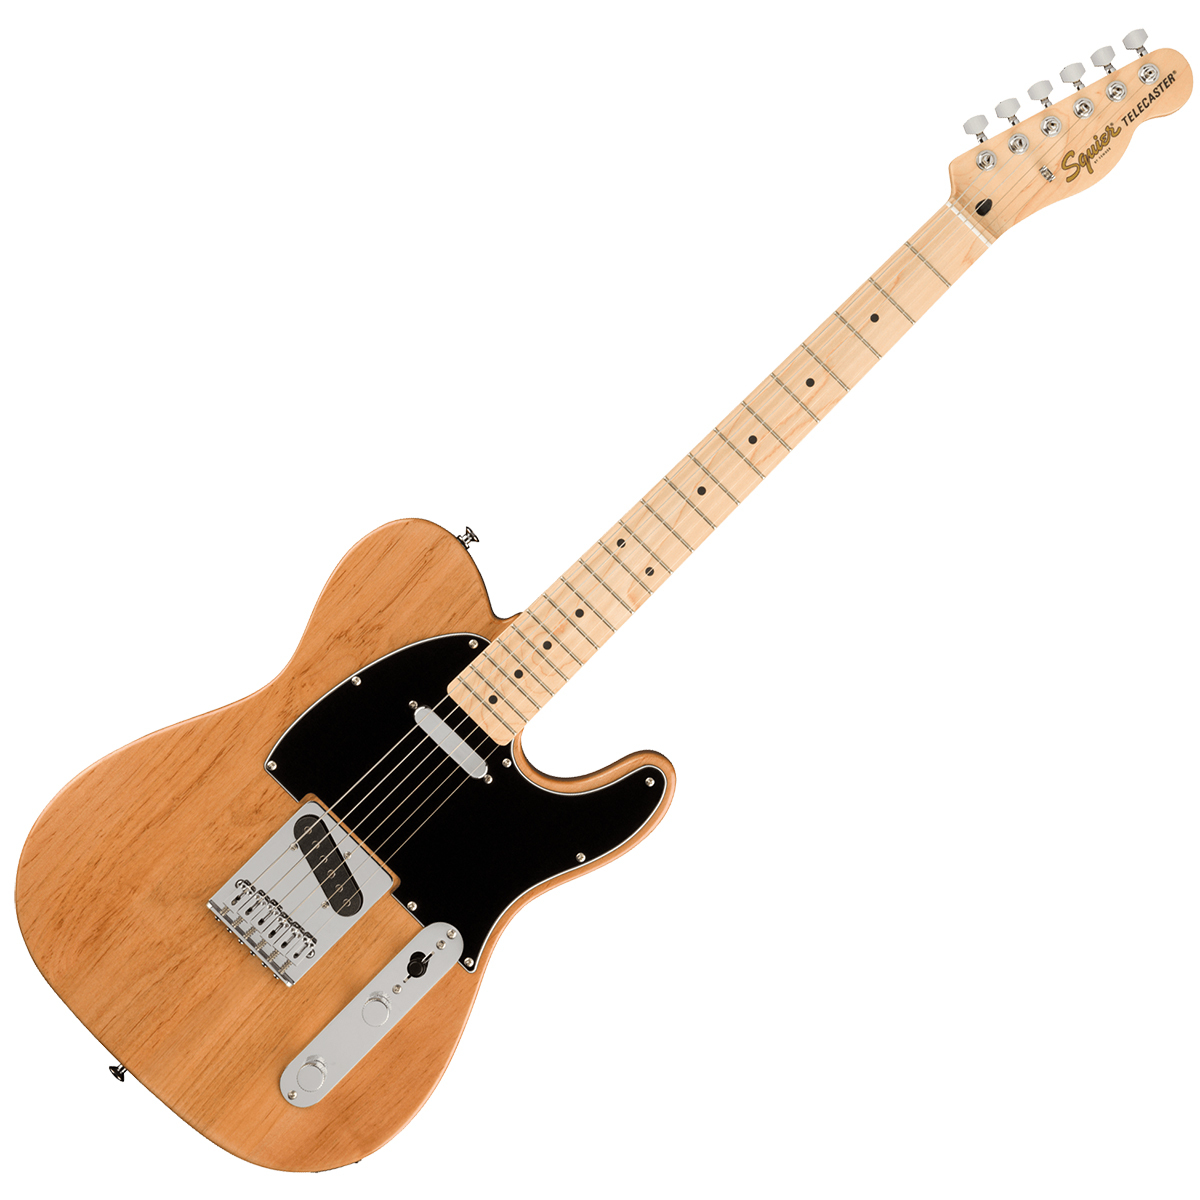 Squier by Fender FSR Affinity Telecaster NAT エレキギターセット